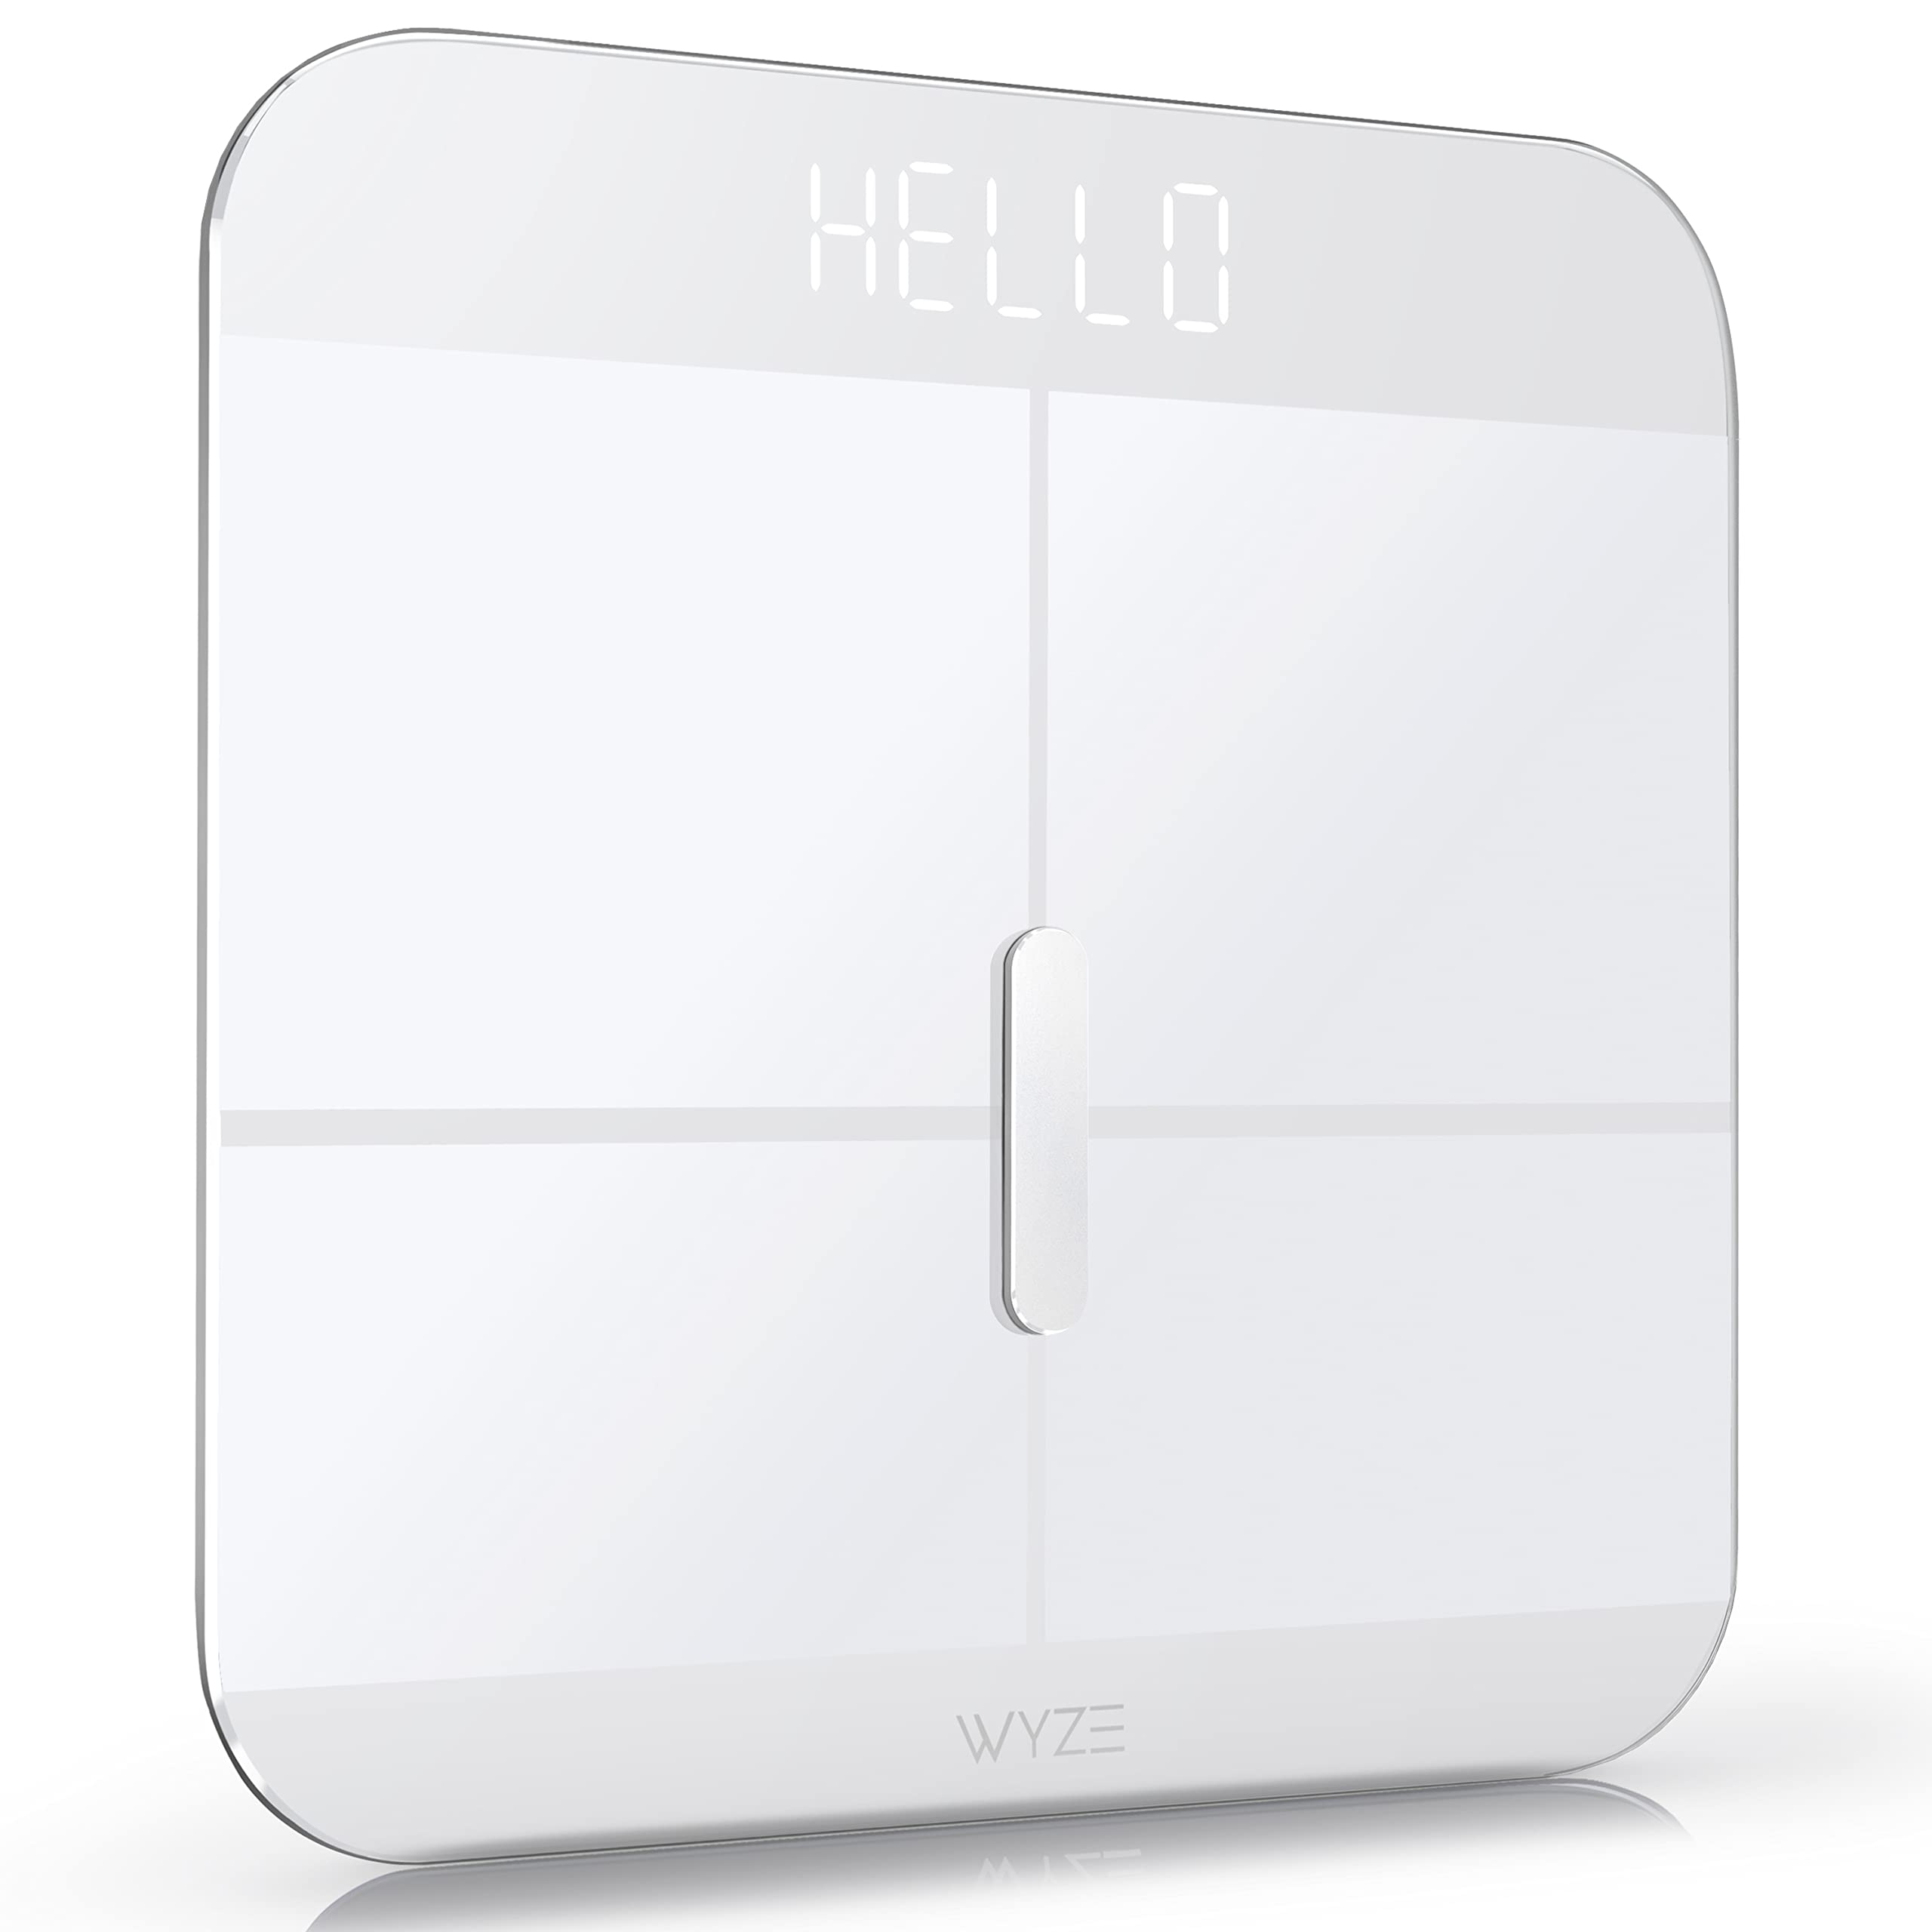 WYZE Smart Scale X for Body Weight, Digital Bathroom Scale for BMI, Body Fat, Water and Muscle, Heart Rate Monitor, Body composi